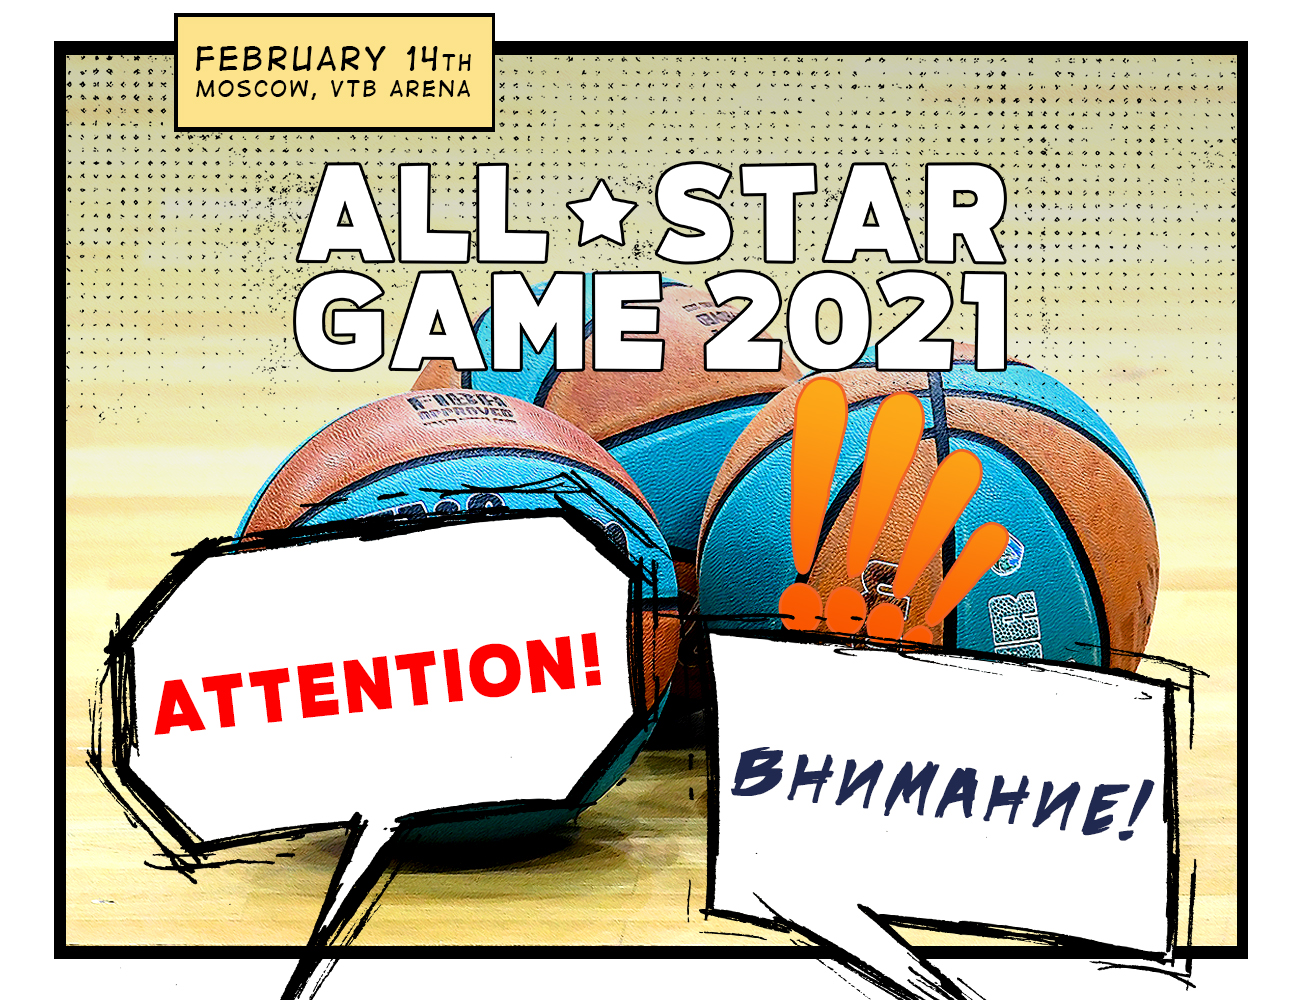 Media attention! Accreditation for All-Star Game 2021 is open